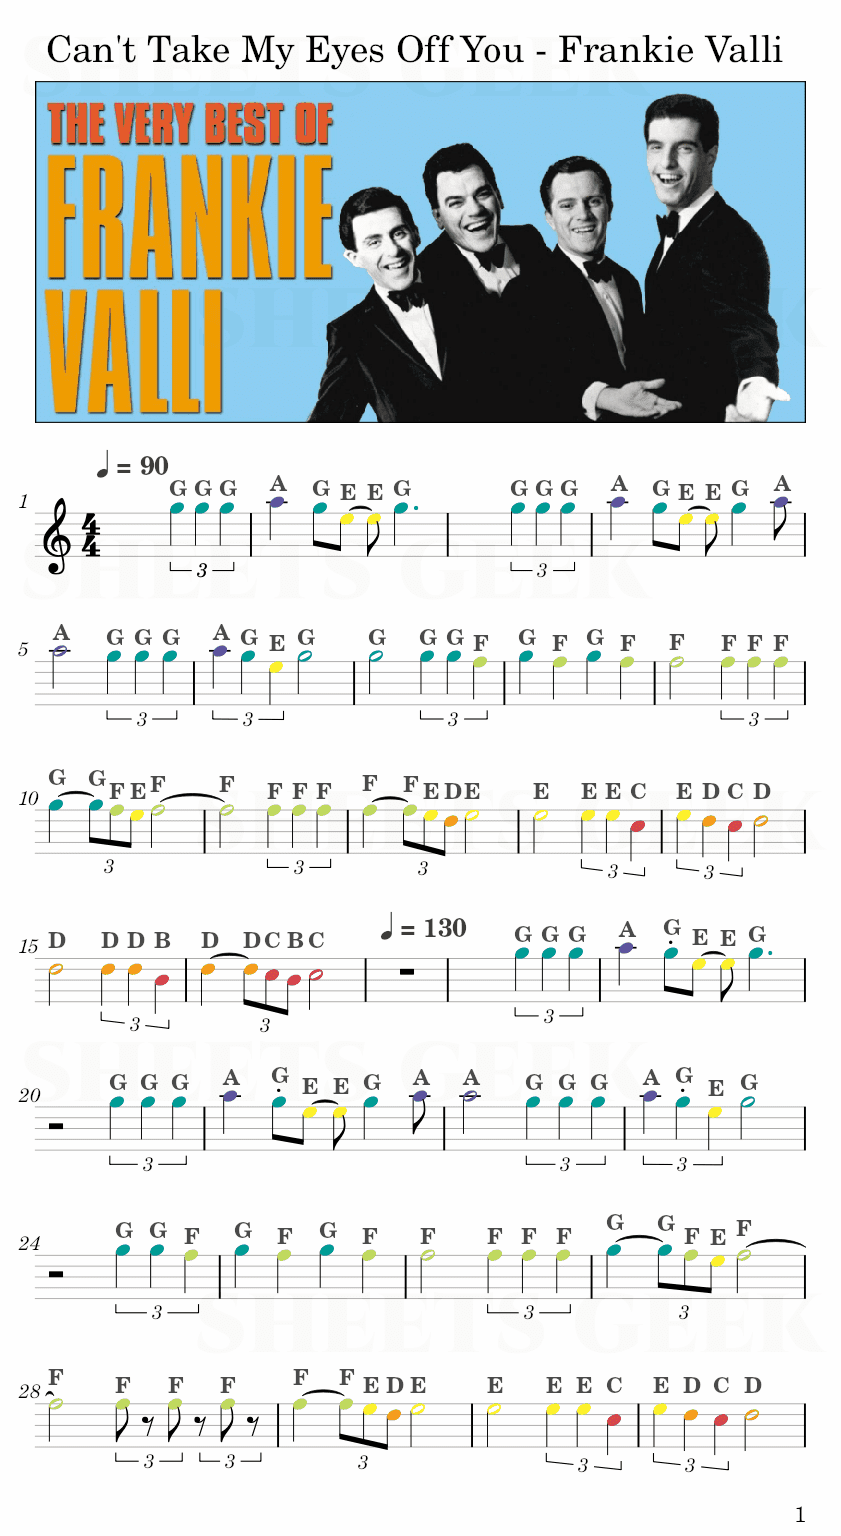 Can't Take My Eyes Off You - Frankie Valli Easy Sheet Music Free for piano, keyboard, flute, violin, sax, cello page 1